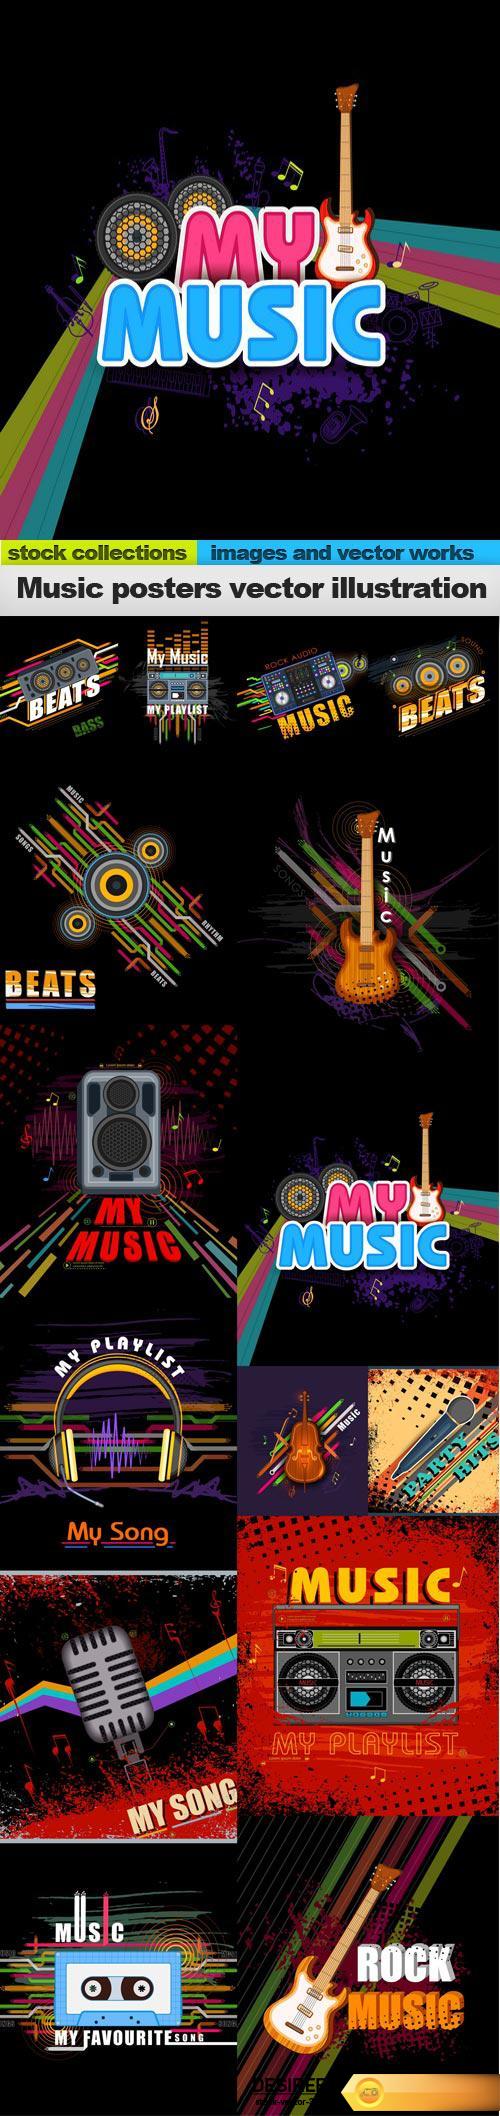 Music posters vector illustration, 15 x EPS